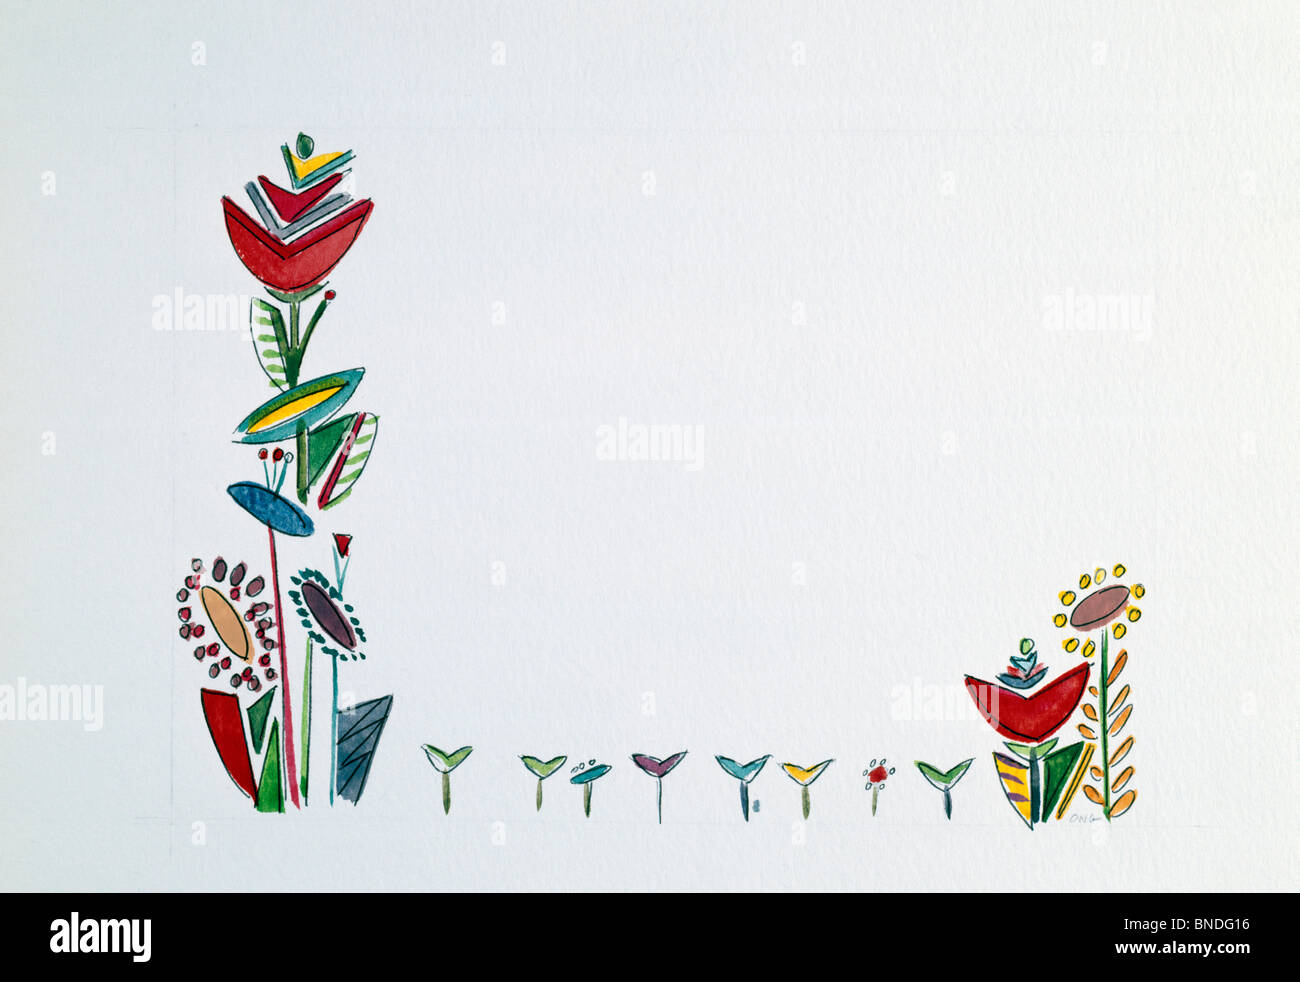 Cartoon ornament floral vector seamless borders 03 free download